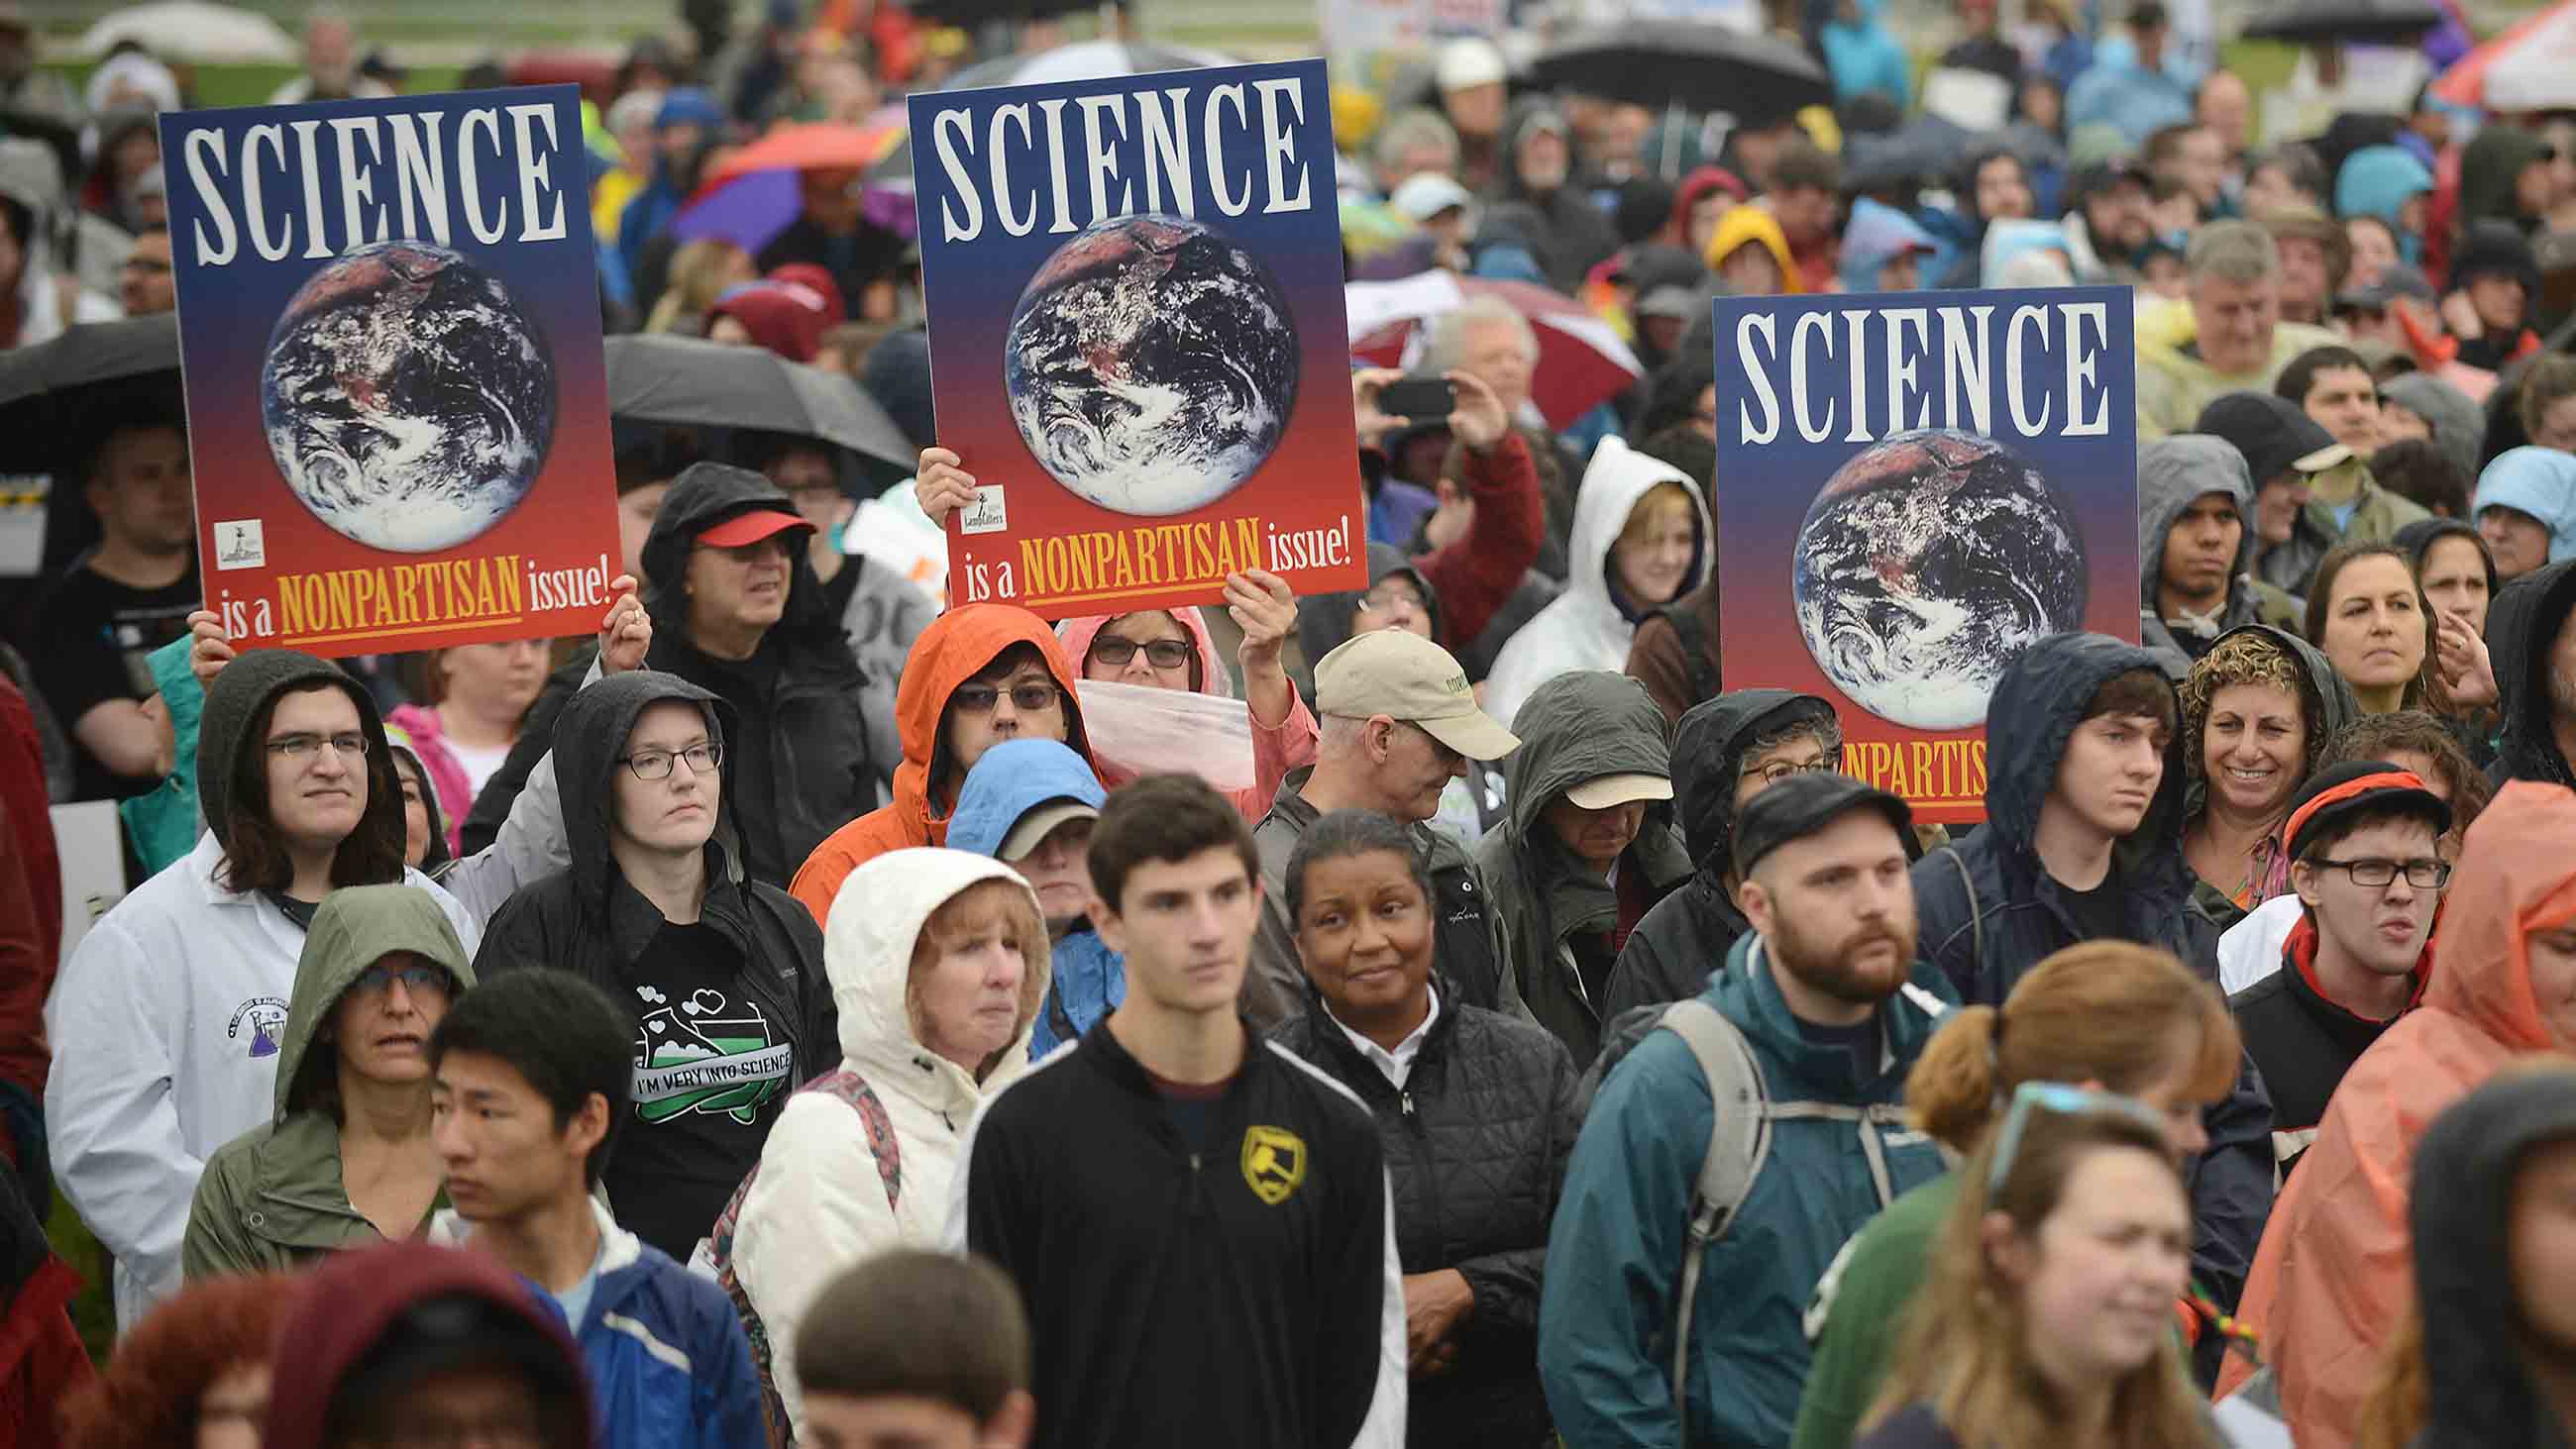 For activists in Washington and around the world, the election of Donald Trump crystallized deep discontent with science as it's practiced and funded.